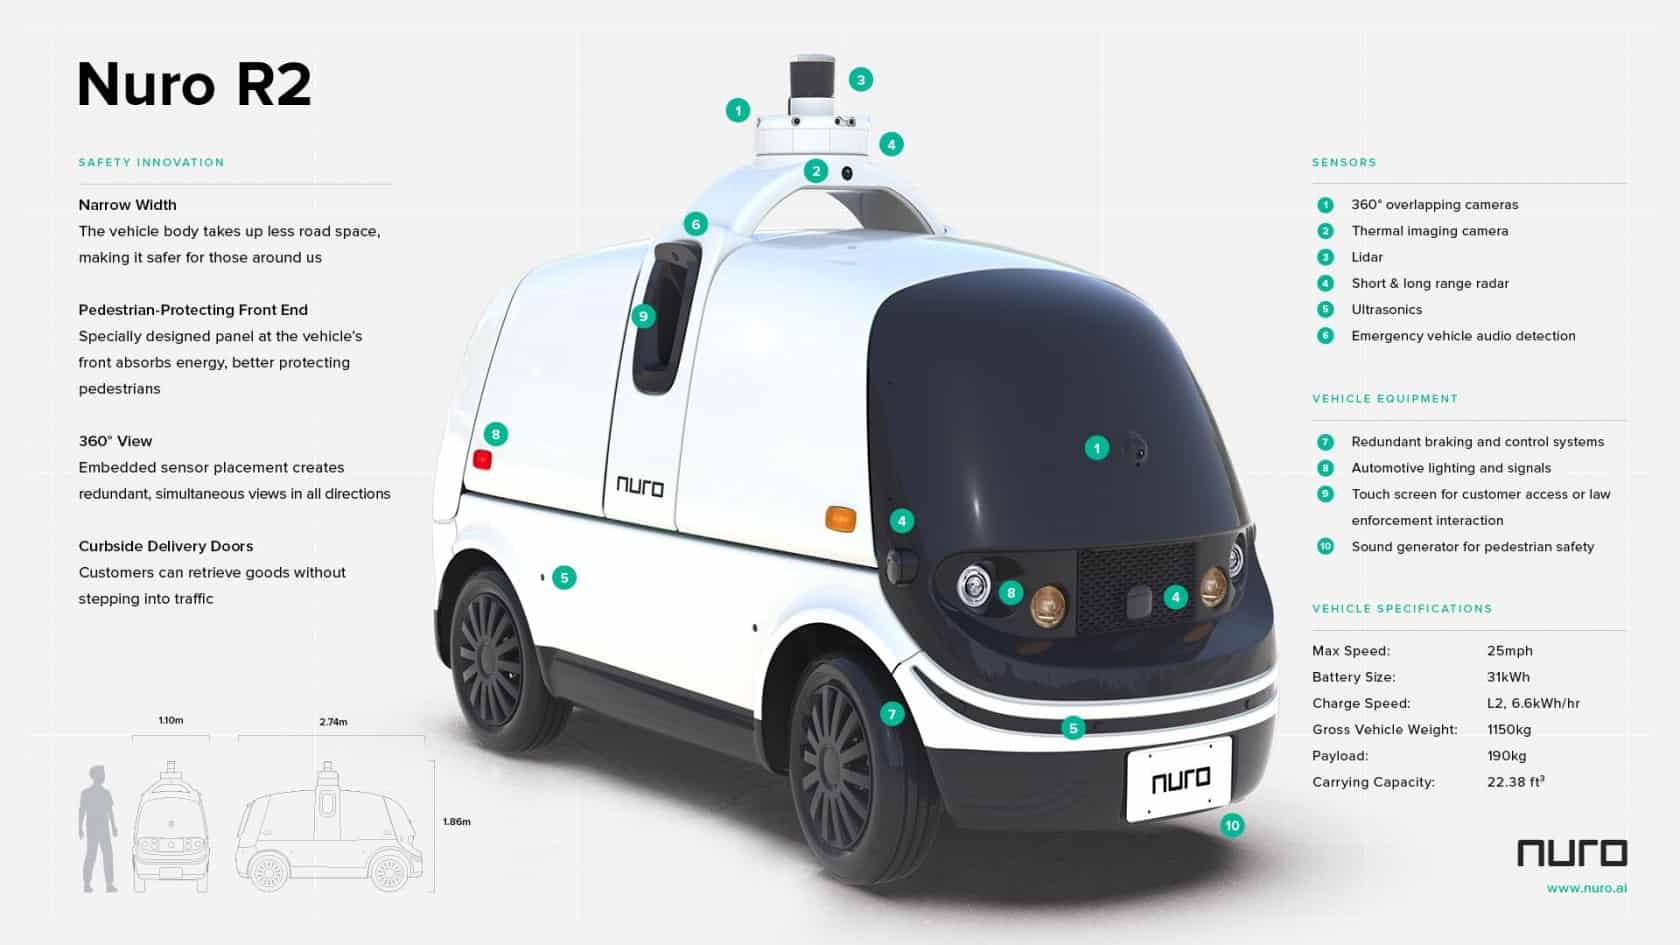 Nuro's R2 vehicle has been granted the NHTSA's first regulatory exemption for a custom self-driving car 1